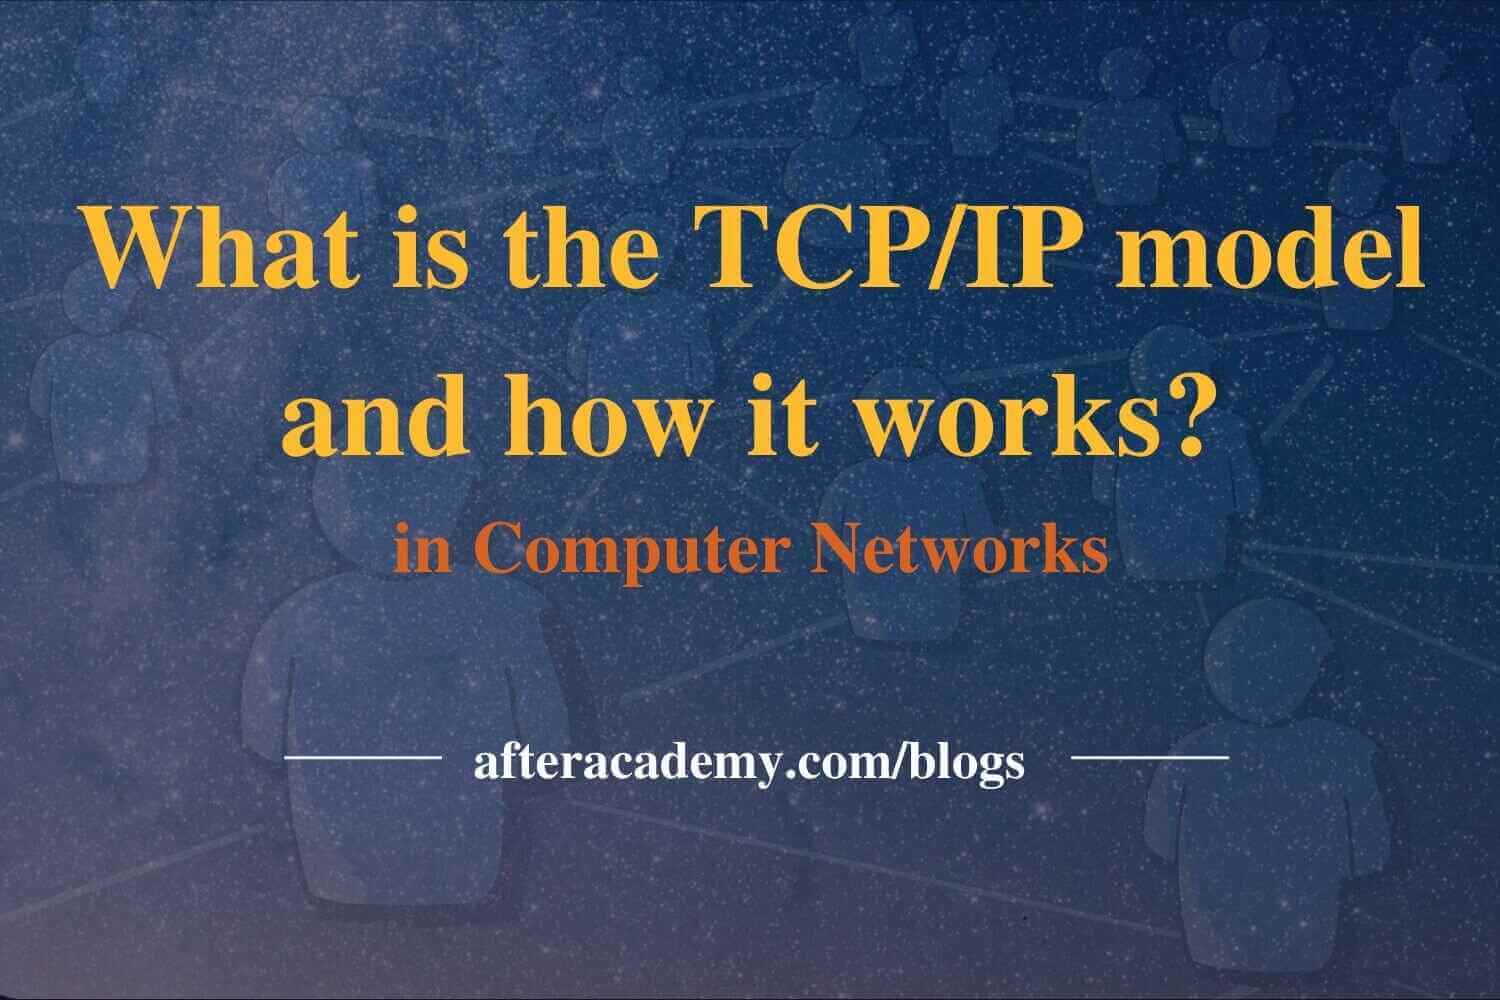 What is the TCP/IP model and how it works?